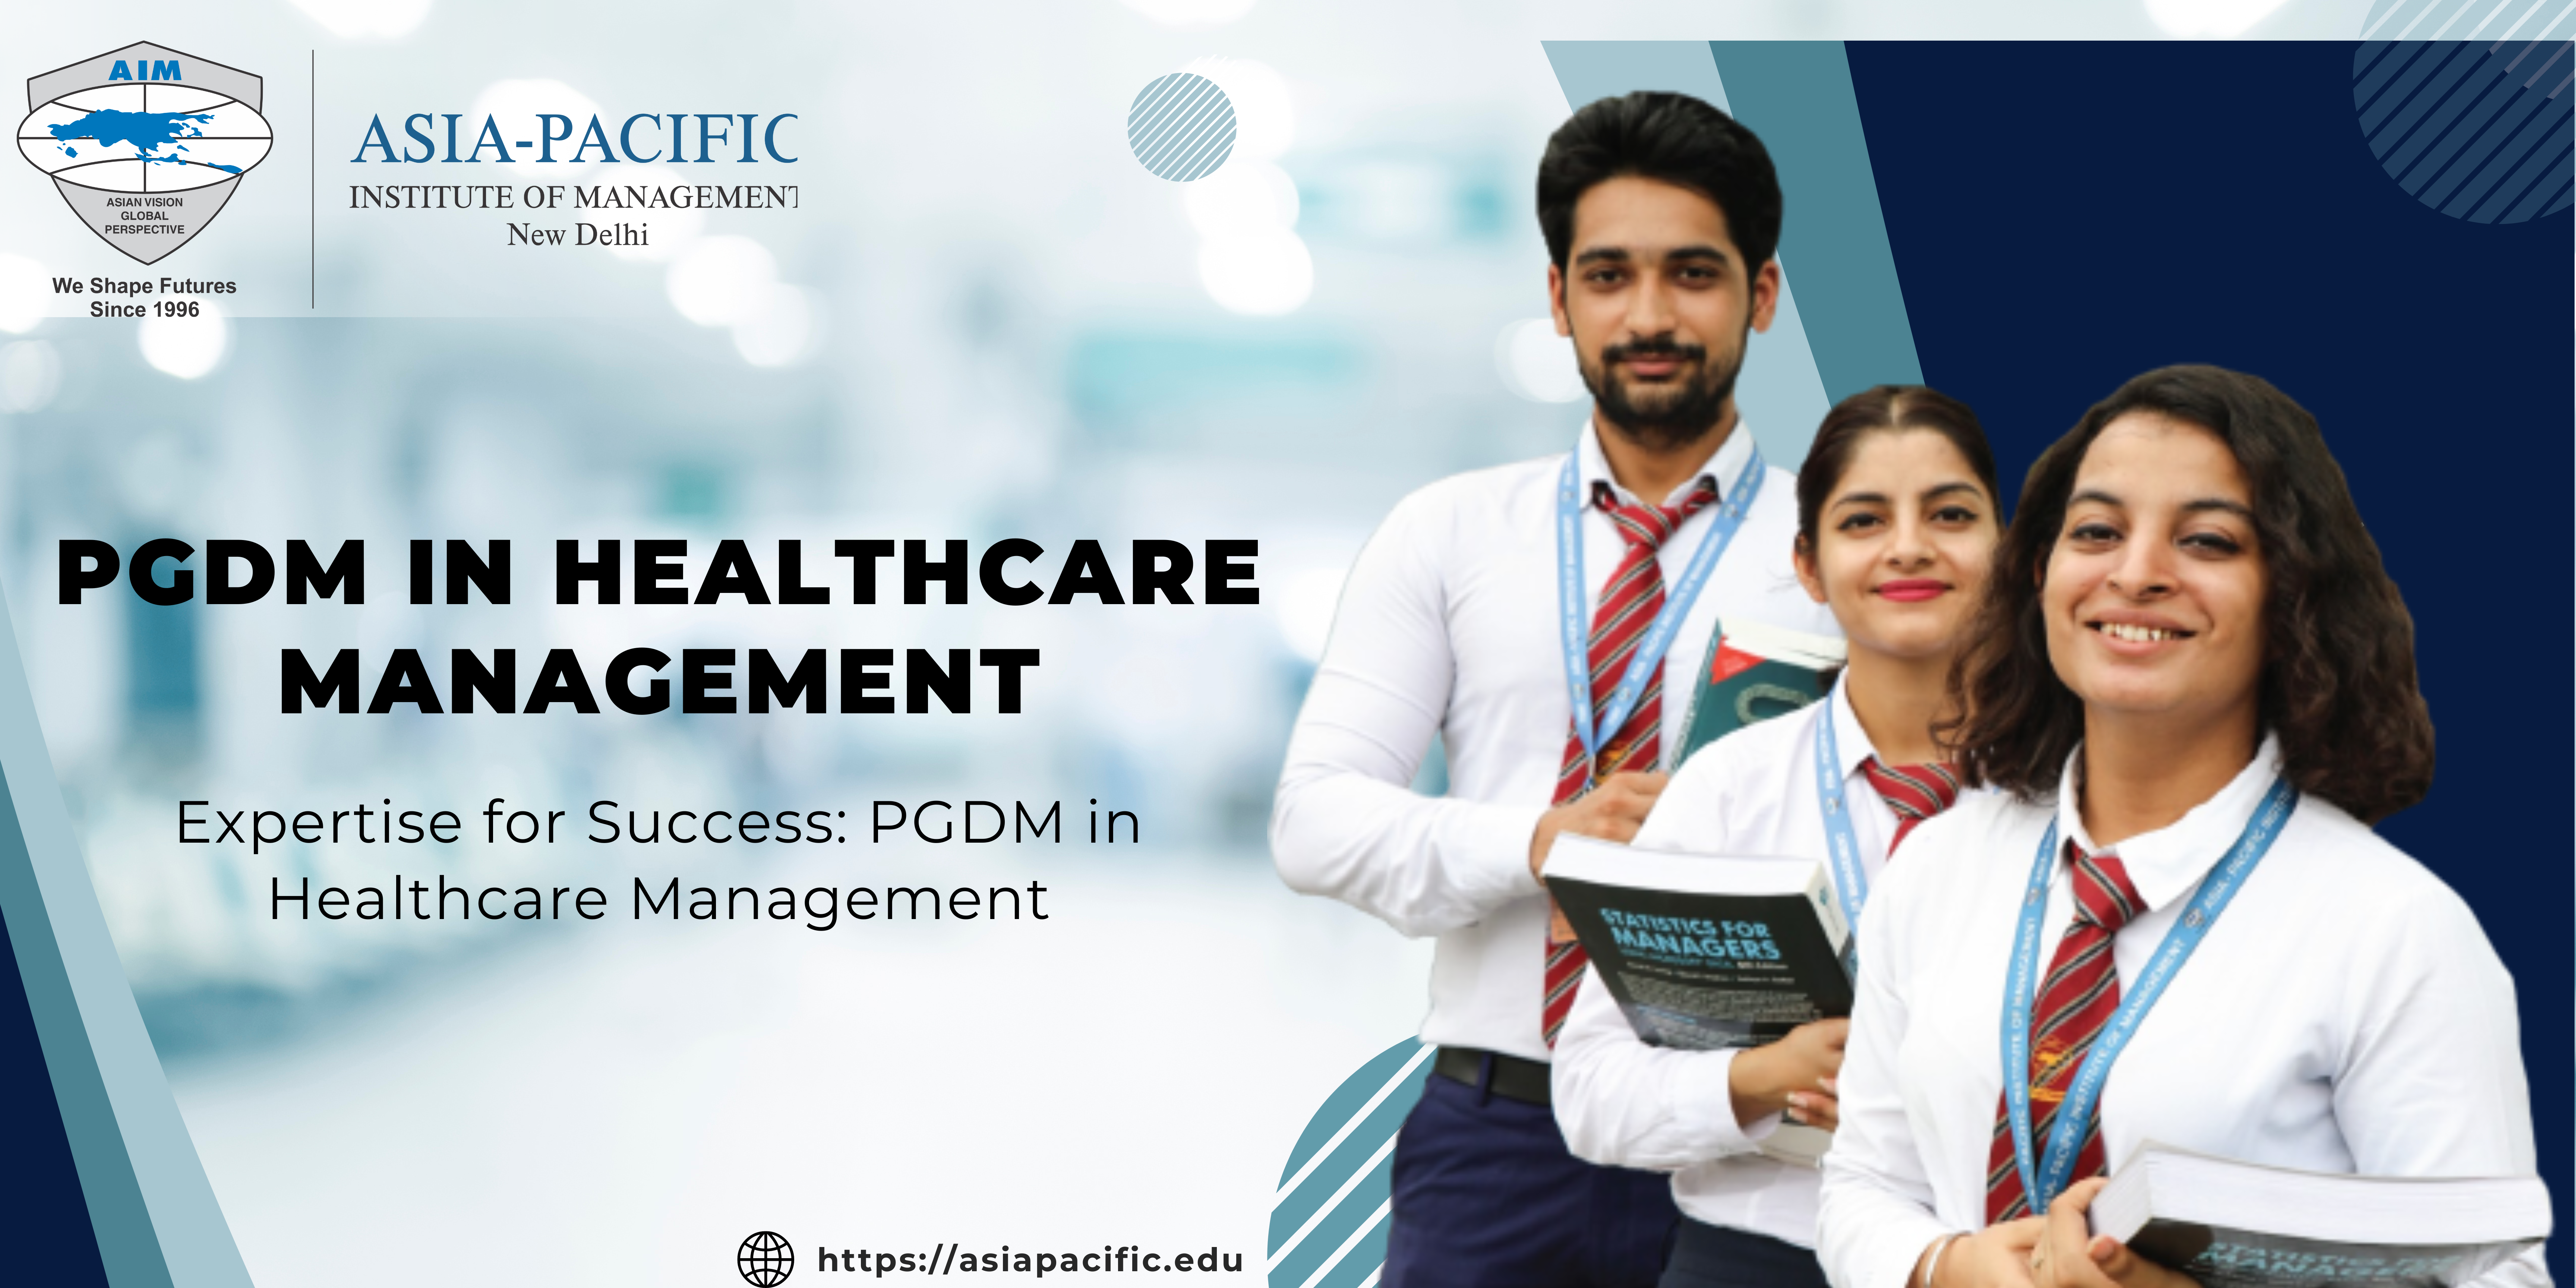 PGDM in Healthcare Management